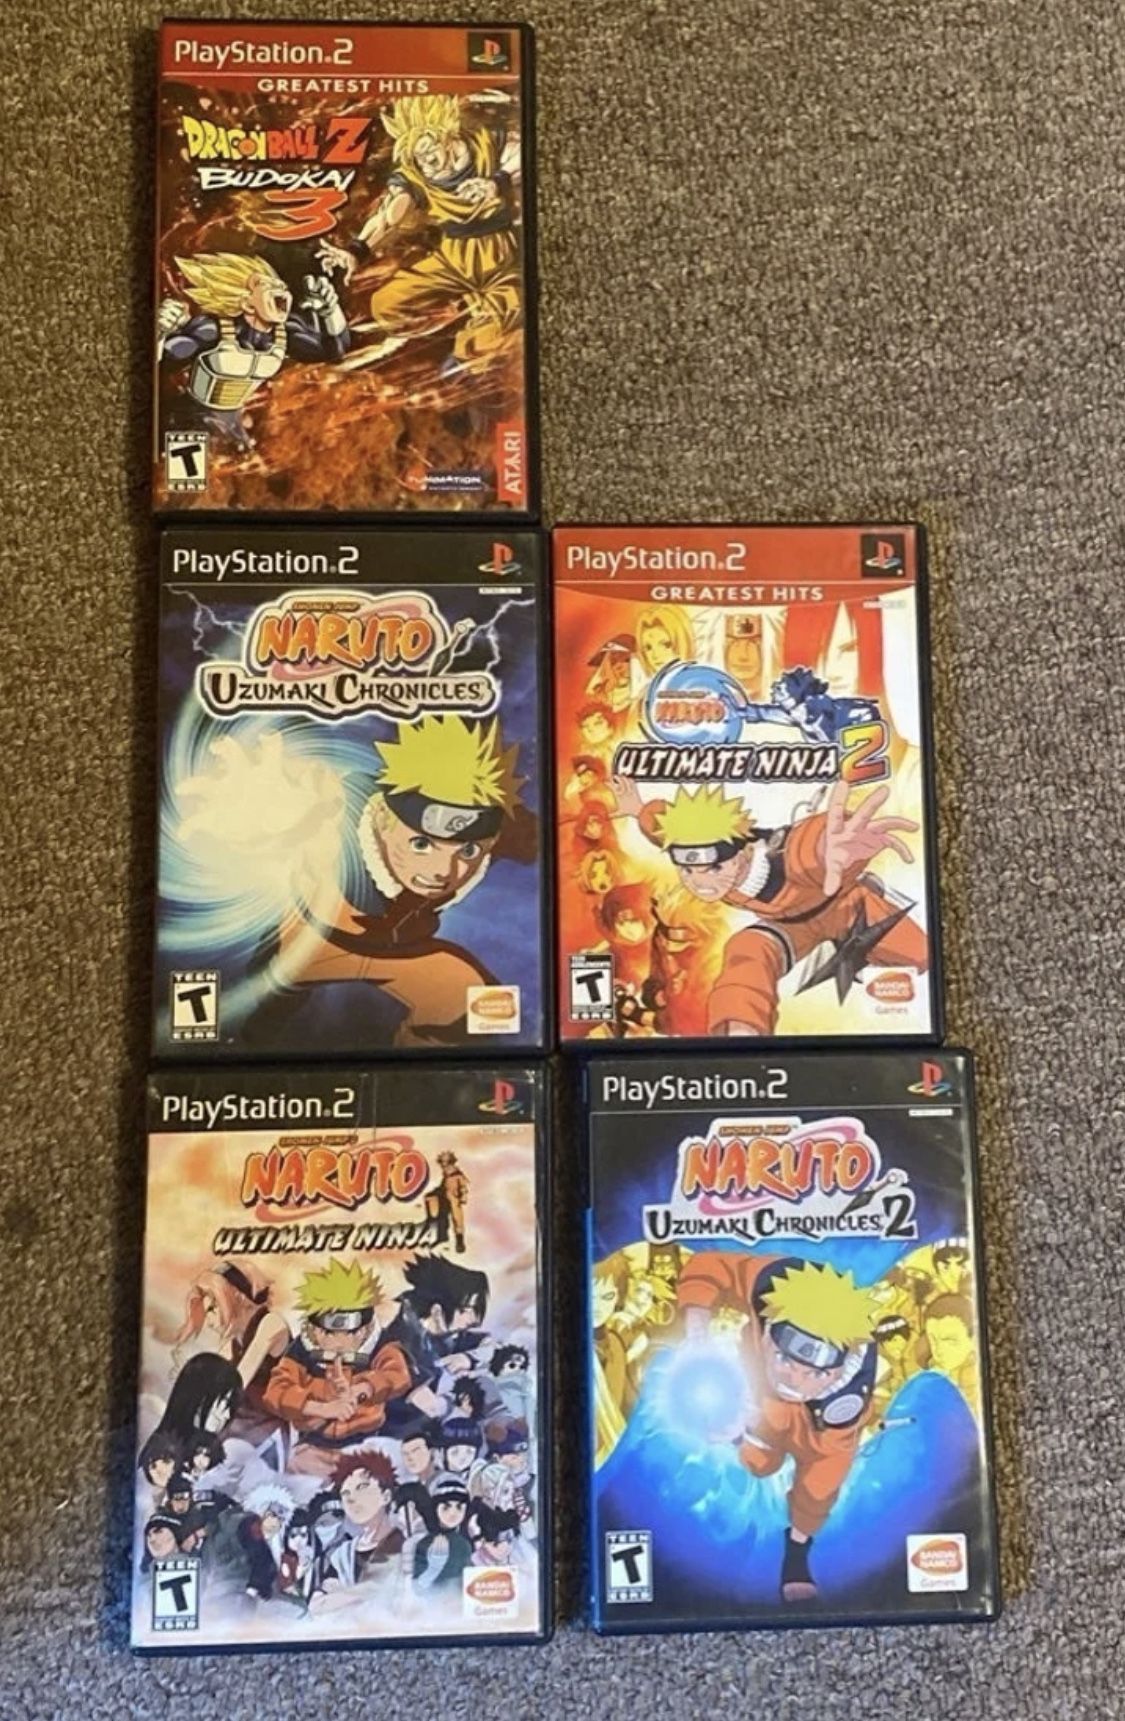 5 ps2 games that includes naruto and one dragon ball game with a bonus Xbox game